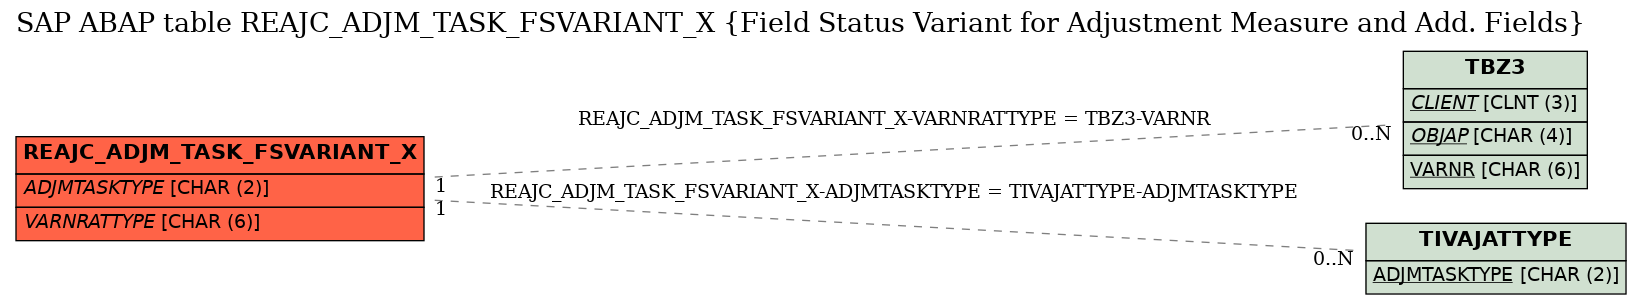 E-R Diagram for table REAJC_ADJM_TASK_FSVARIANT_X (Field Status Variant for Adjustment Measure and Add. Fields)